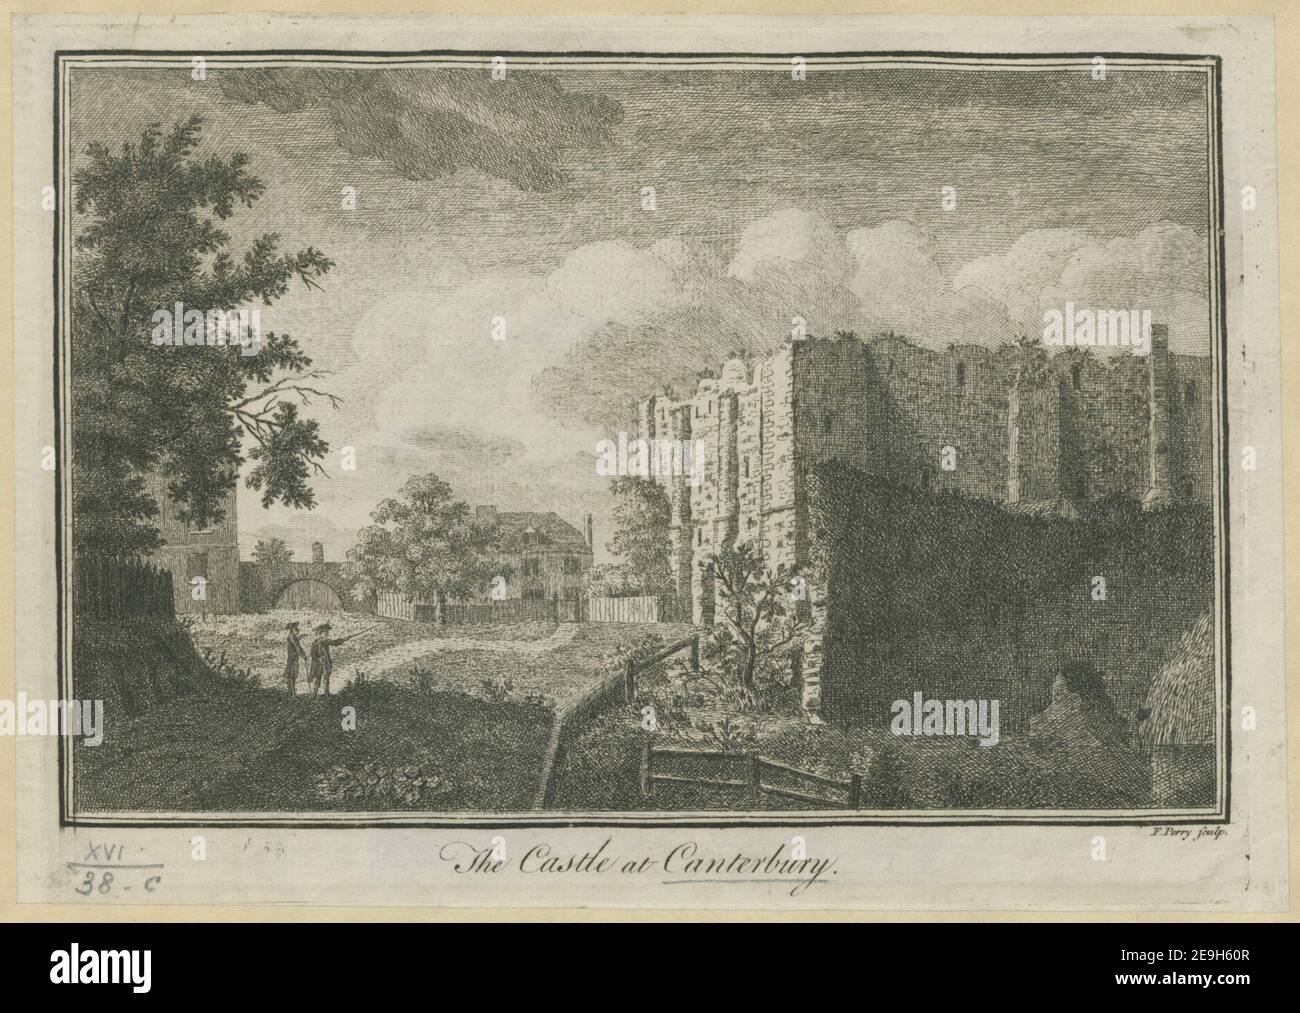 The Castle at Canterbury  Author  Perry, Francis 16.38.c. Place of publication: [London ?] Publisher: [unknown publisher] Date of publication: [1750-1765 c.]  Item type: 1 print Medium: etching Dimensions: platemark 16.8 x 23.5 cm.  Former owner: George III, King of Great Britain, 1738-1820 Stock Photo